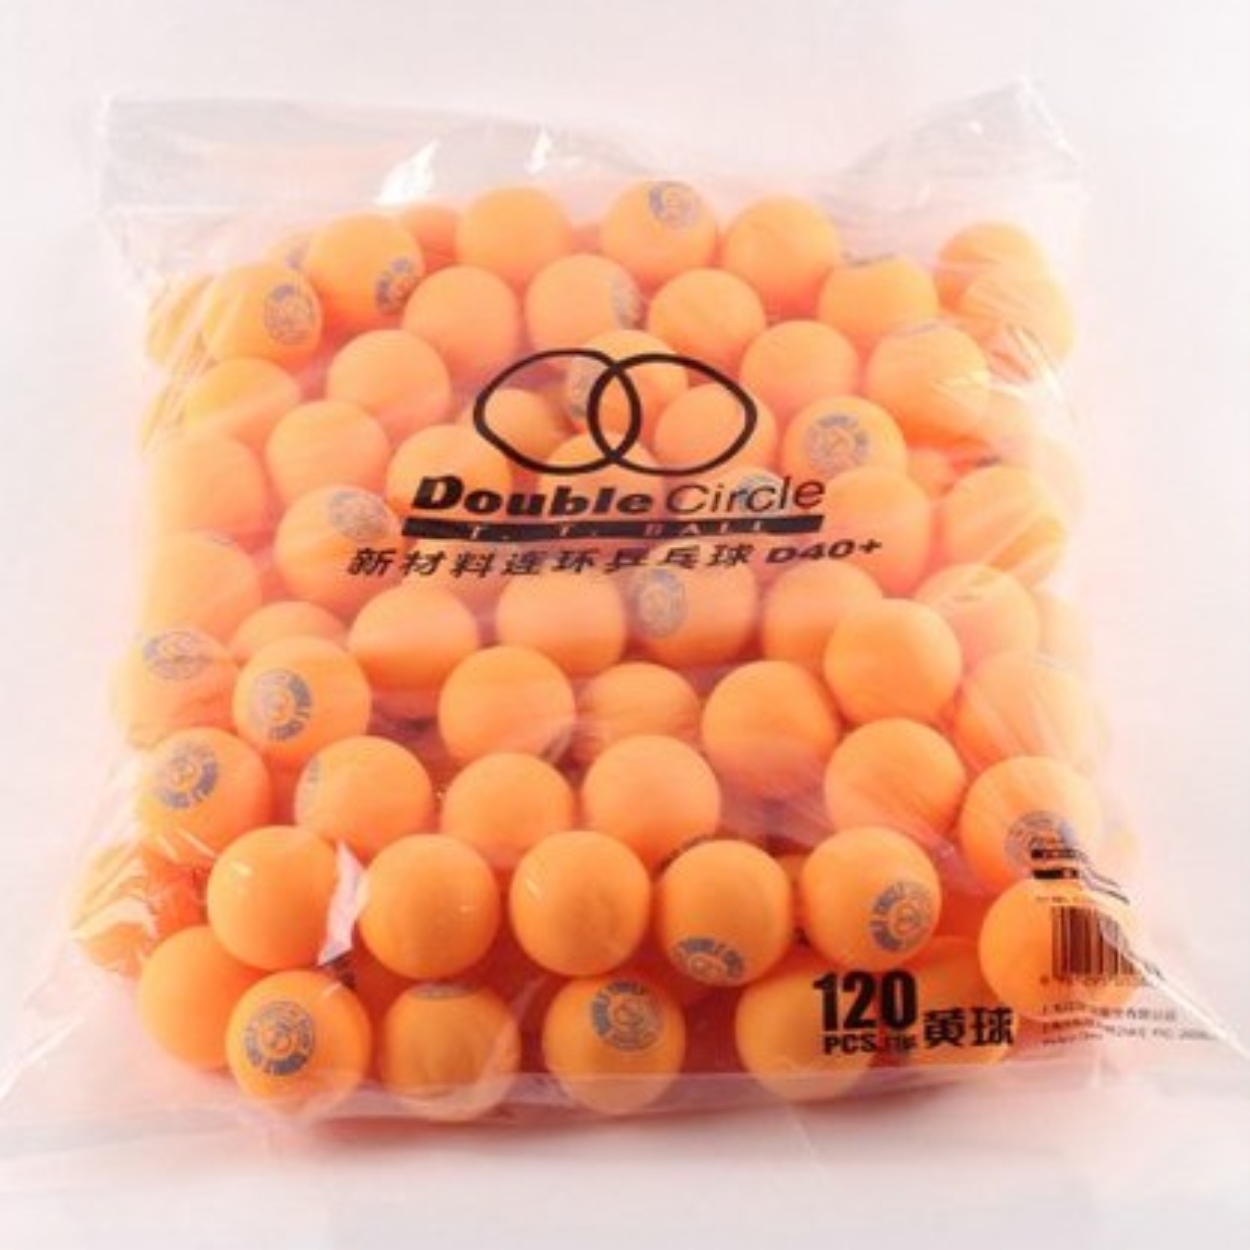 DOUBLE CIRCLE BALL CD40DY Orange 40MM+ CF POLY (pack of 120)